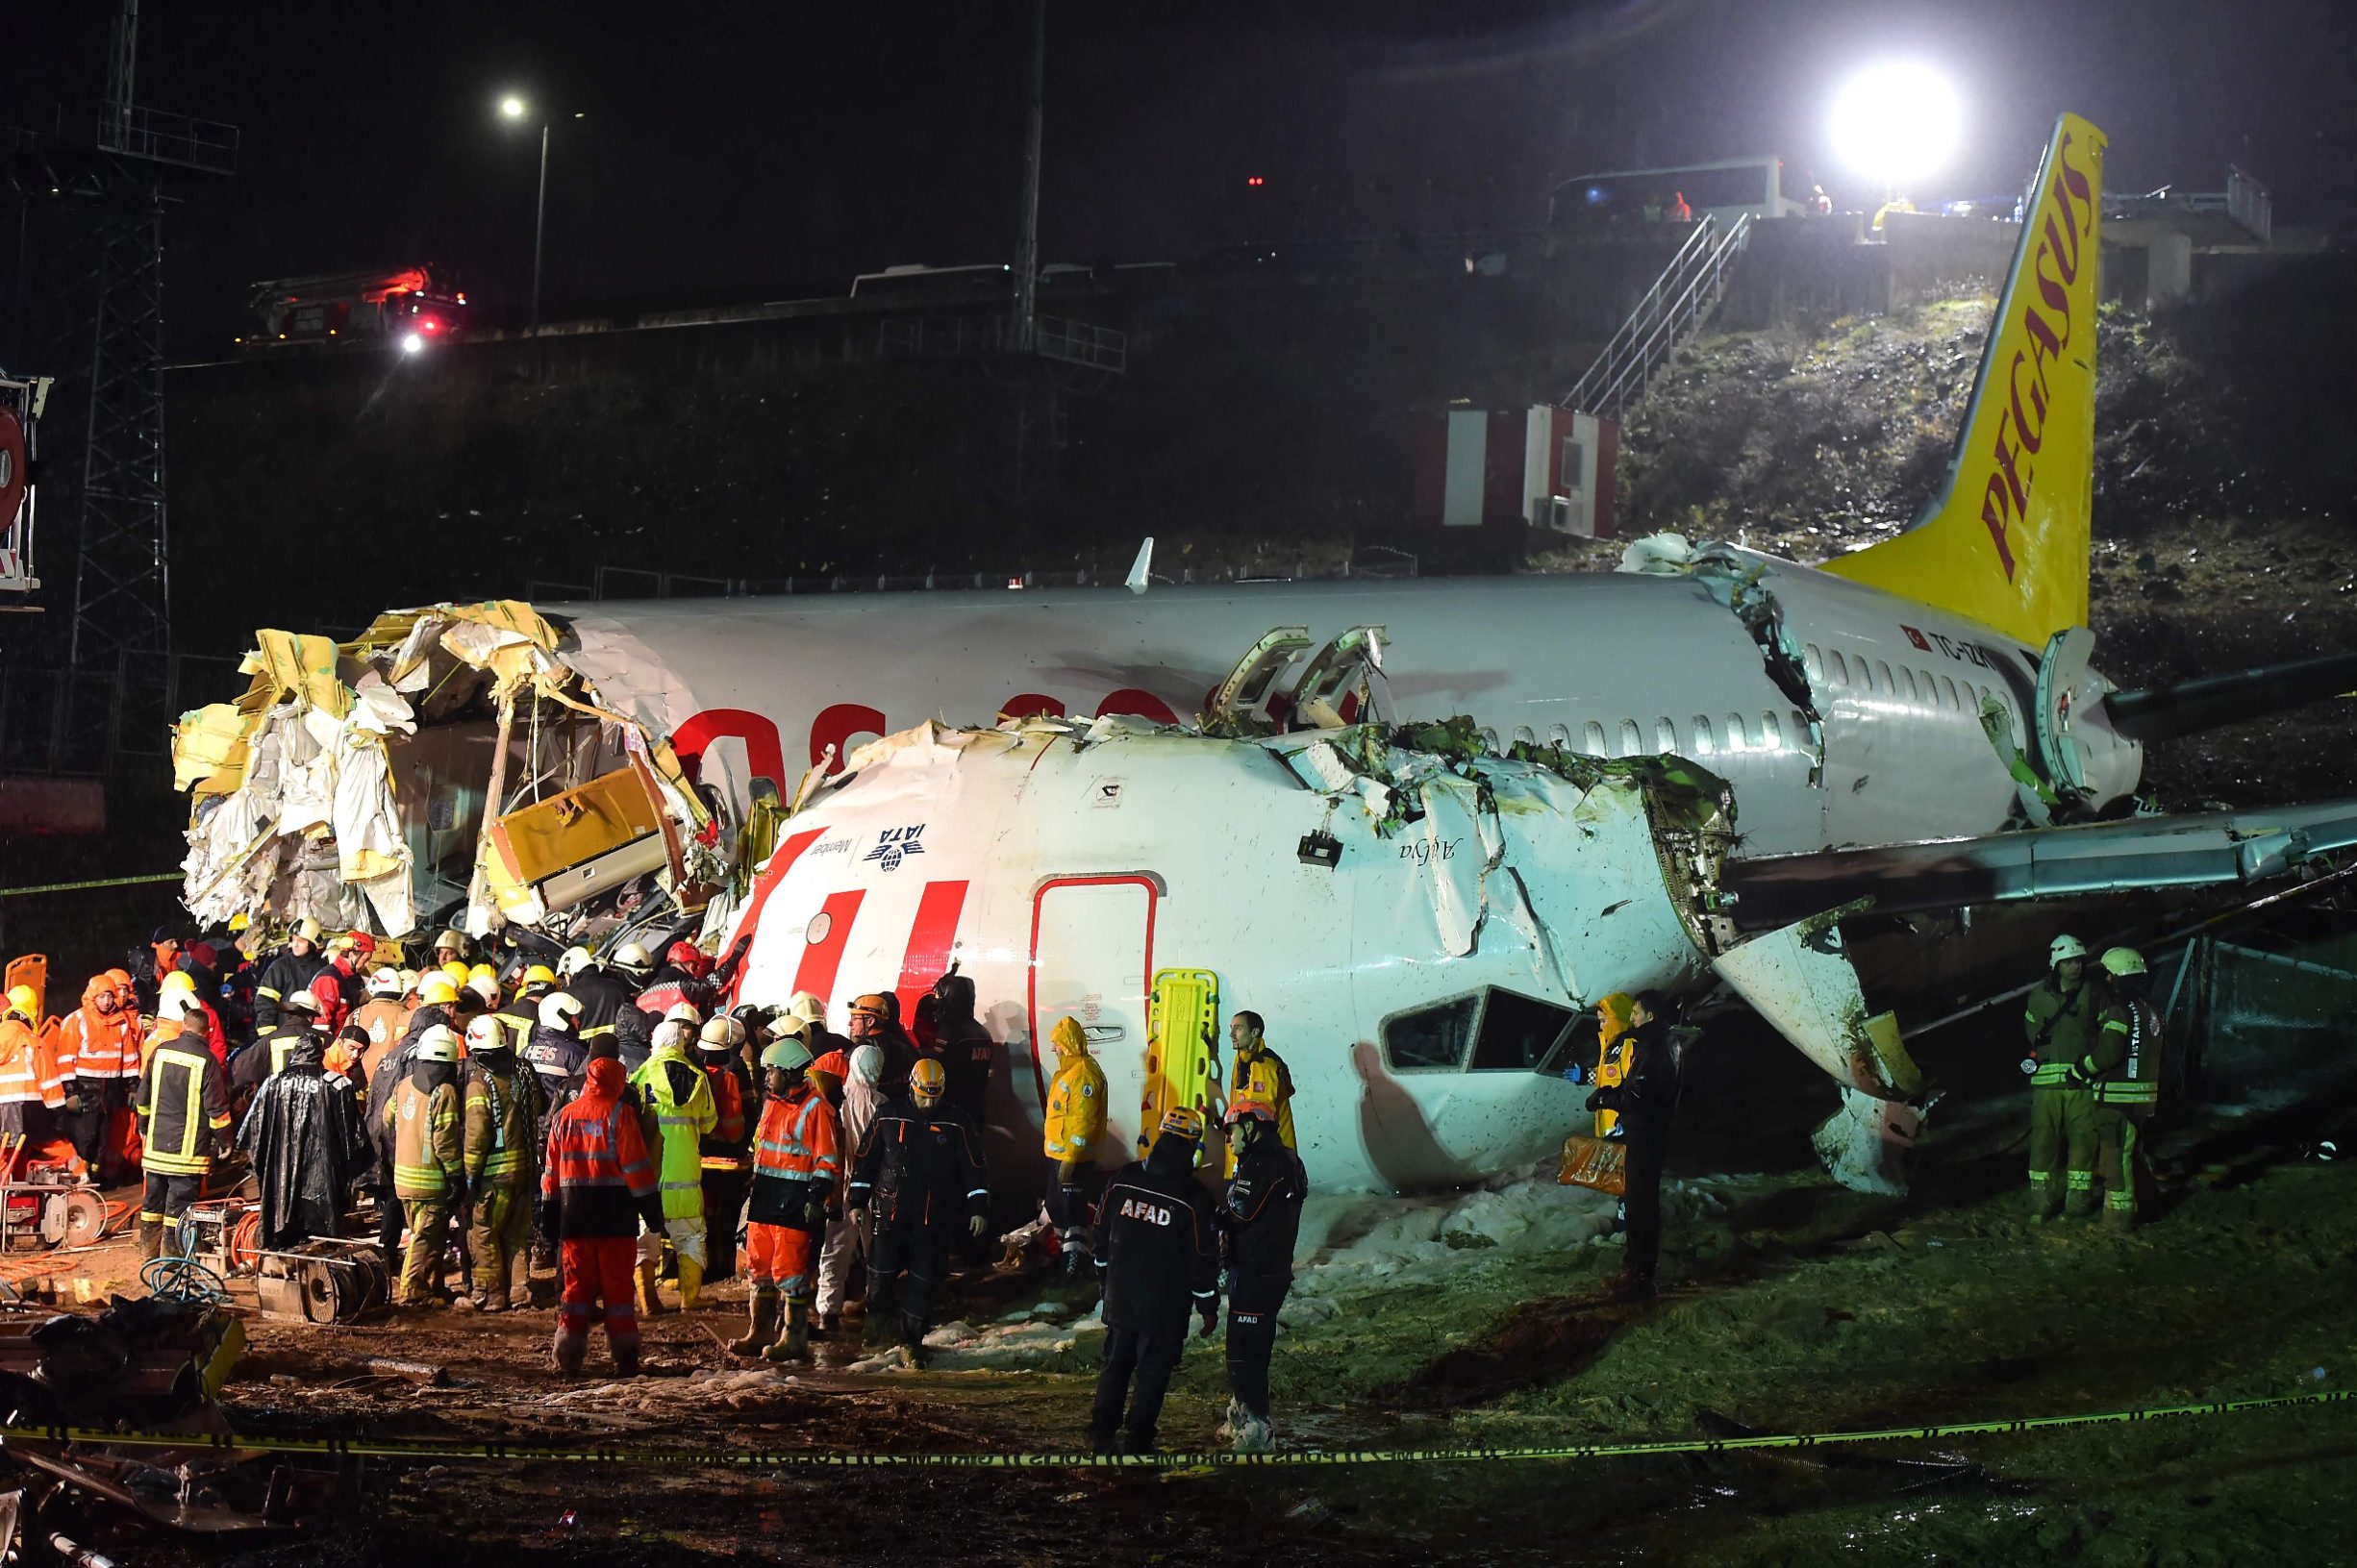 Rescuers work to extract passengers from the crash of a Pegasus Airlines Boeing 737 airplane, after it skidded off the runway upon landing at Sabiha Gokcen airport in Istanbul on February 5, 2020. - The plane carrying 171 passengers from the Aegean port city of Izmir split into three after landing in rough weather. Officials said no-one had lost their lives in the accident, but dozens of people were injured. (Photo by Yasin AKGUL / AFP)